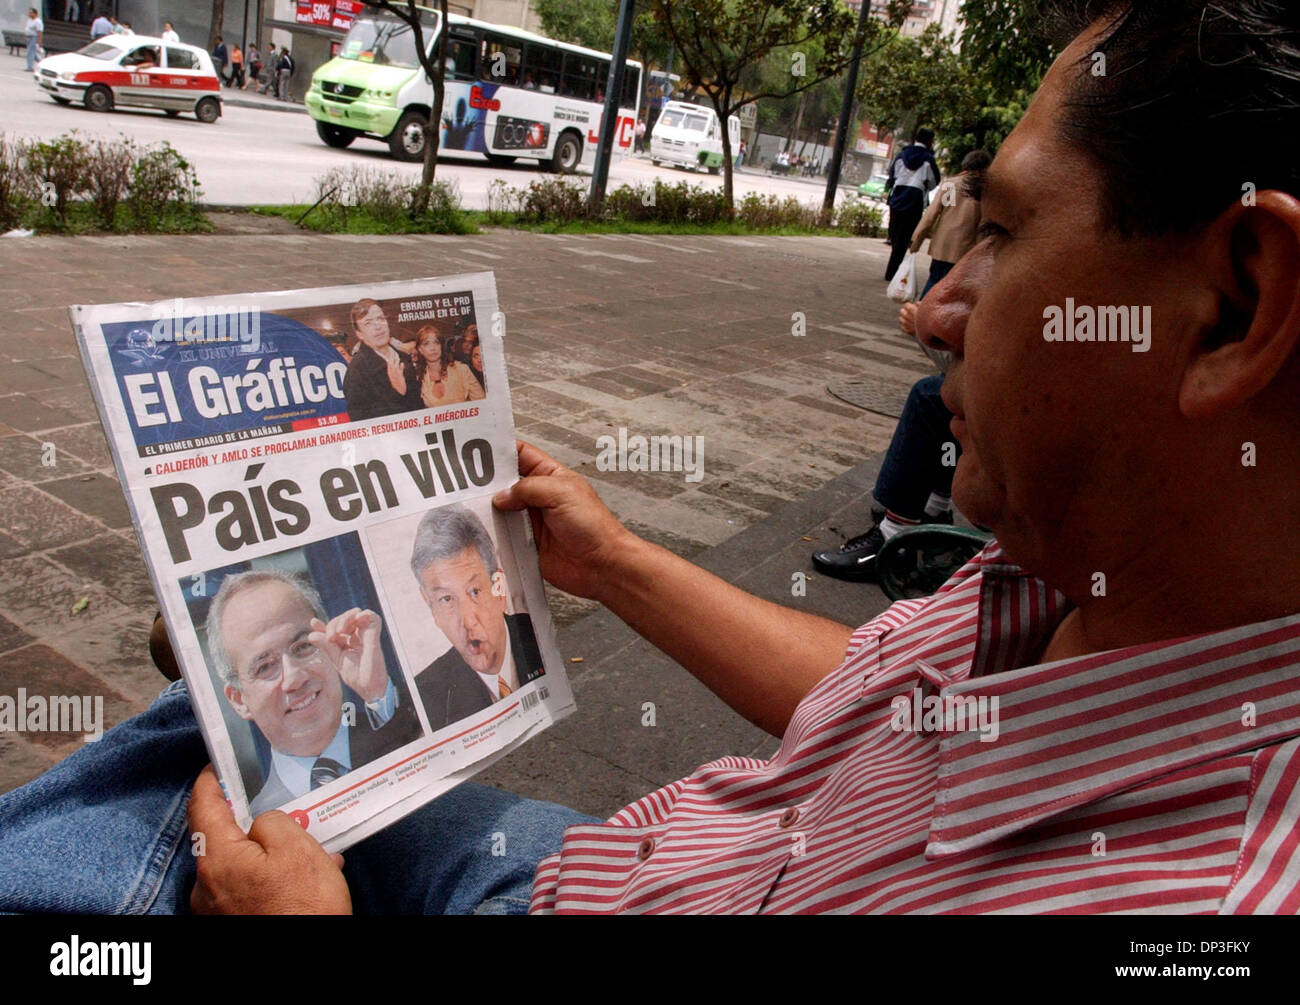 Jul 03, 2006; Mexico City, MEXICO; MARIO MARTINEZ reads a newspaper with a front page story on the close presidental race between Andres Manuel Lopez Obrador and Felipe Calderon Monday July 3, 2006 in Mexico City, Mexico. Mandatory Credit: Photo by Edward A. Ornelas/ZUMA Press. (©) Copyright 2006 by San Antonio Express-News Stock Photo